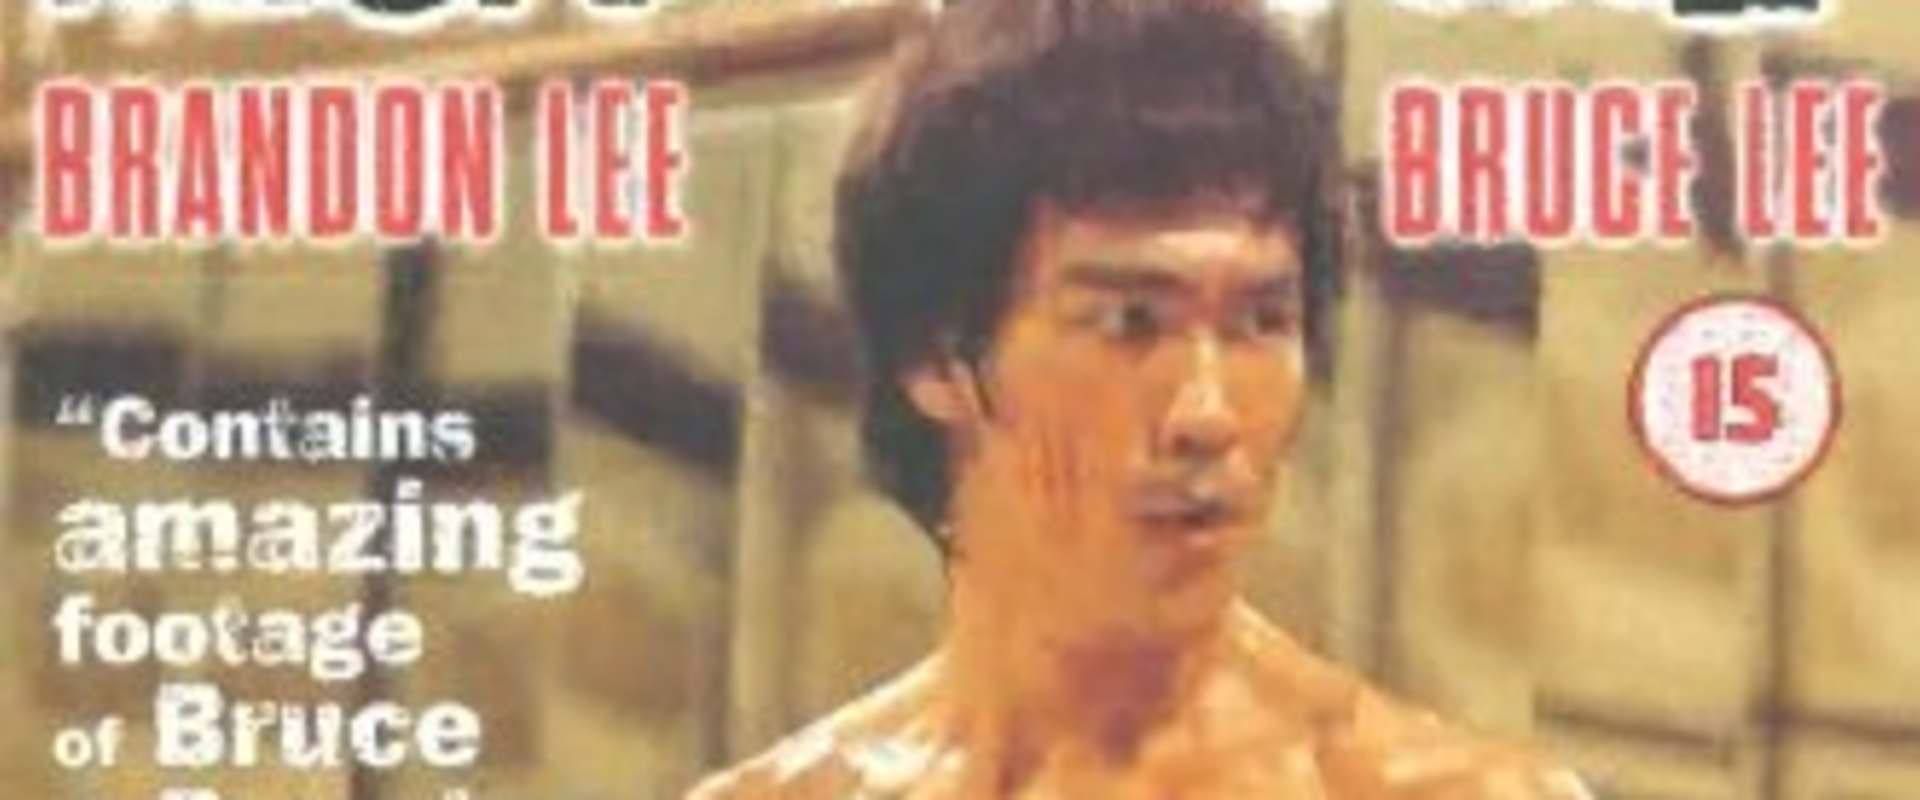 Death by Misadventure: The Mysterious Life of Bruce Lee background 2